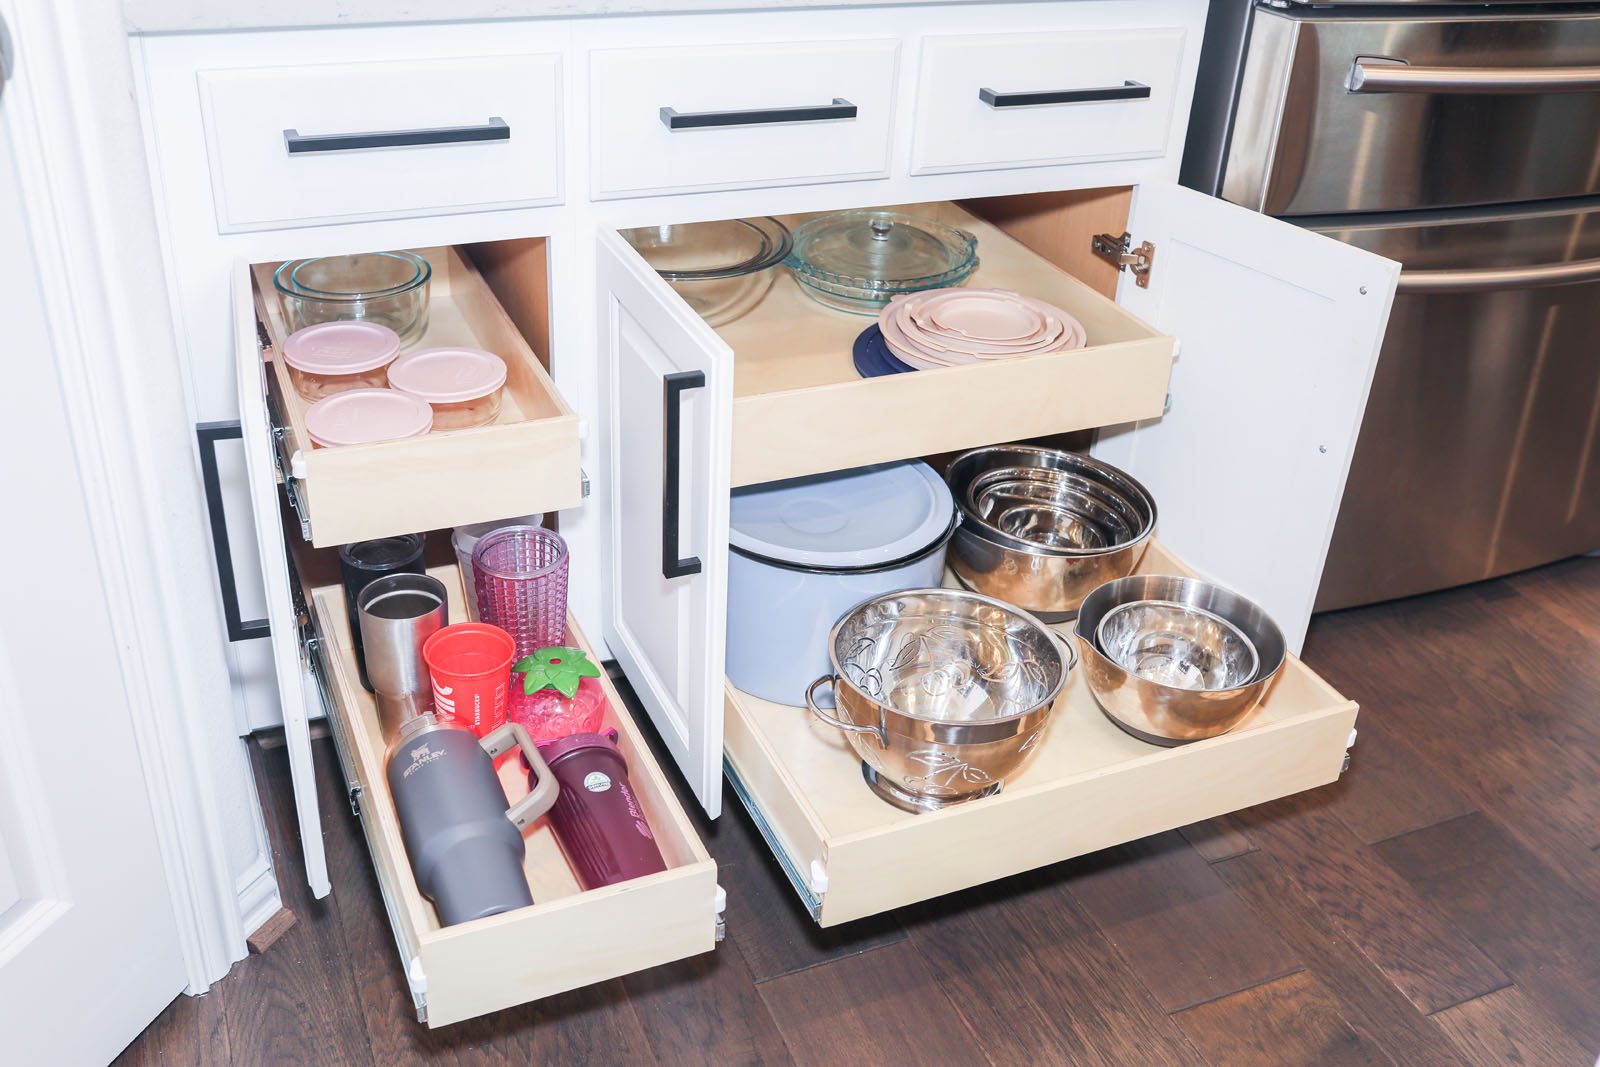 Made-To-Fit Slide-out Shelves for Existing Cabinets by Slide-A-Shelf